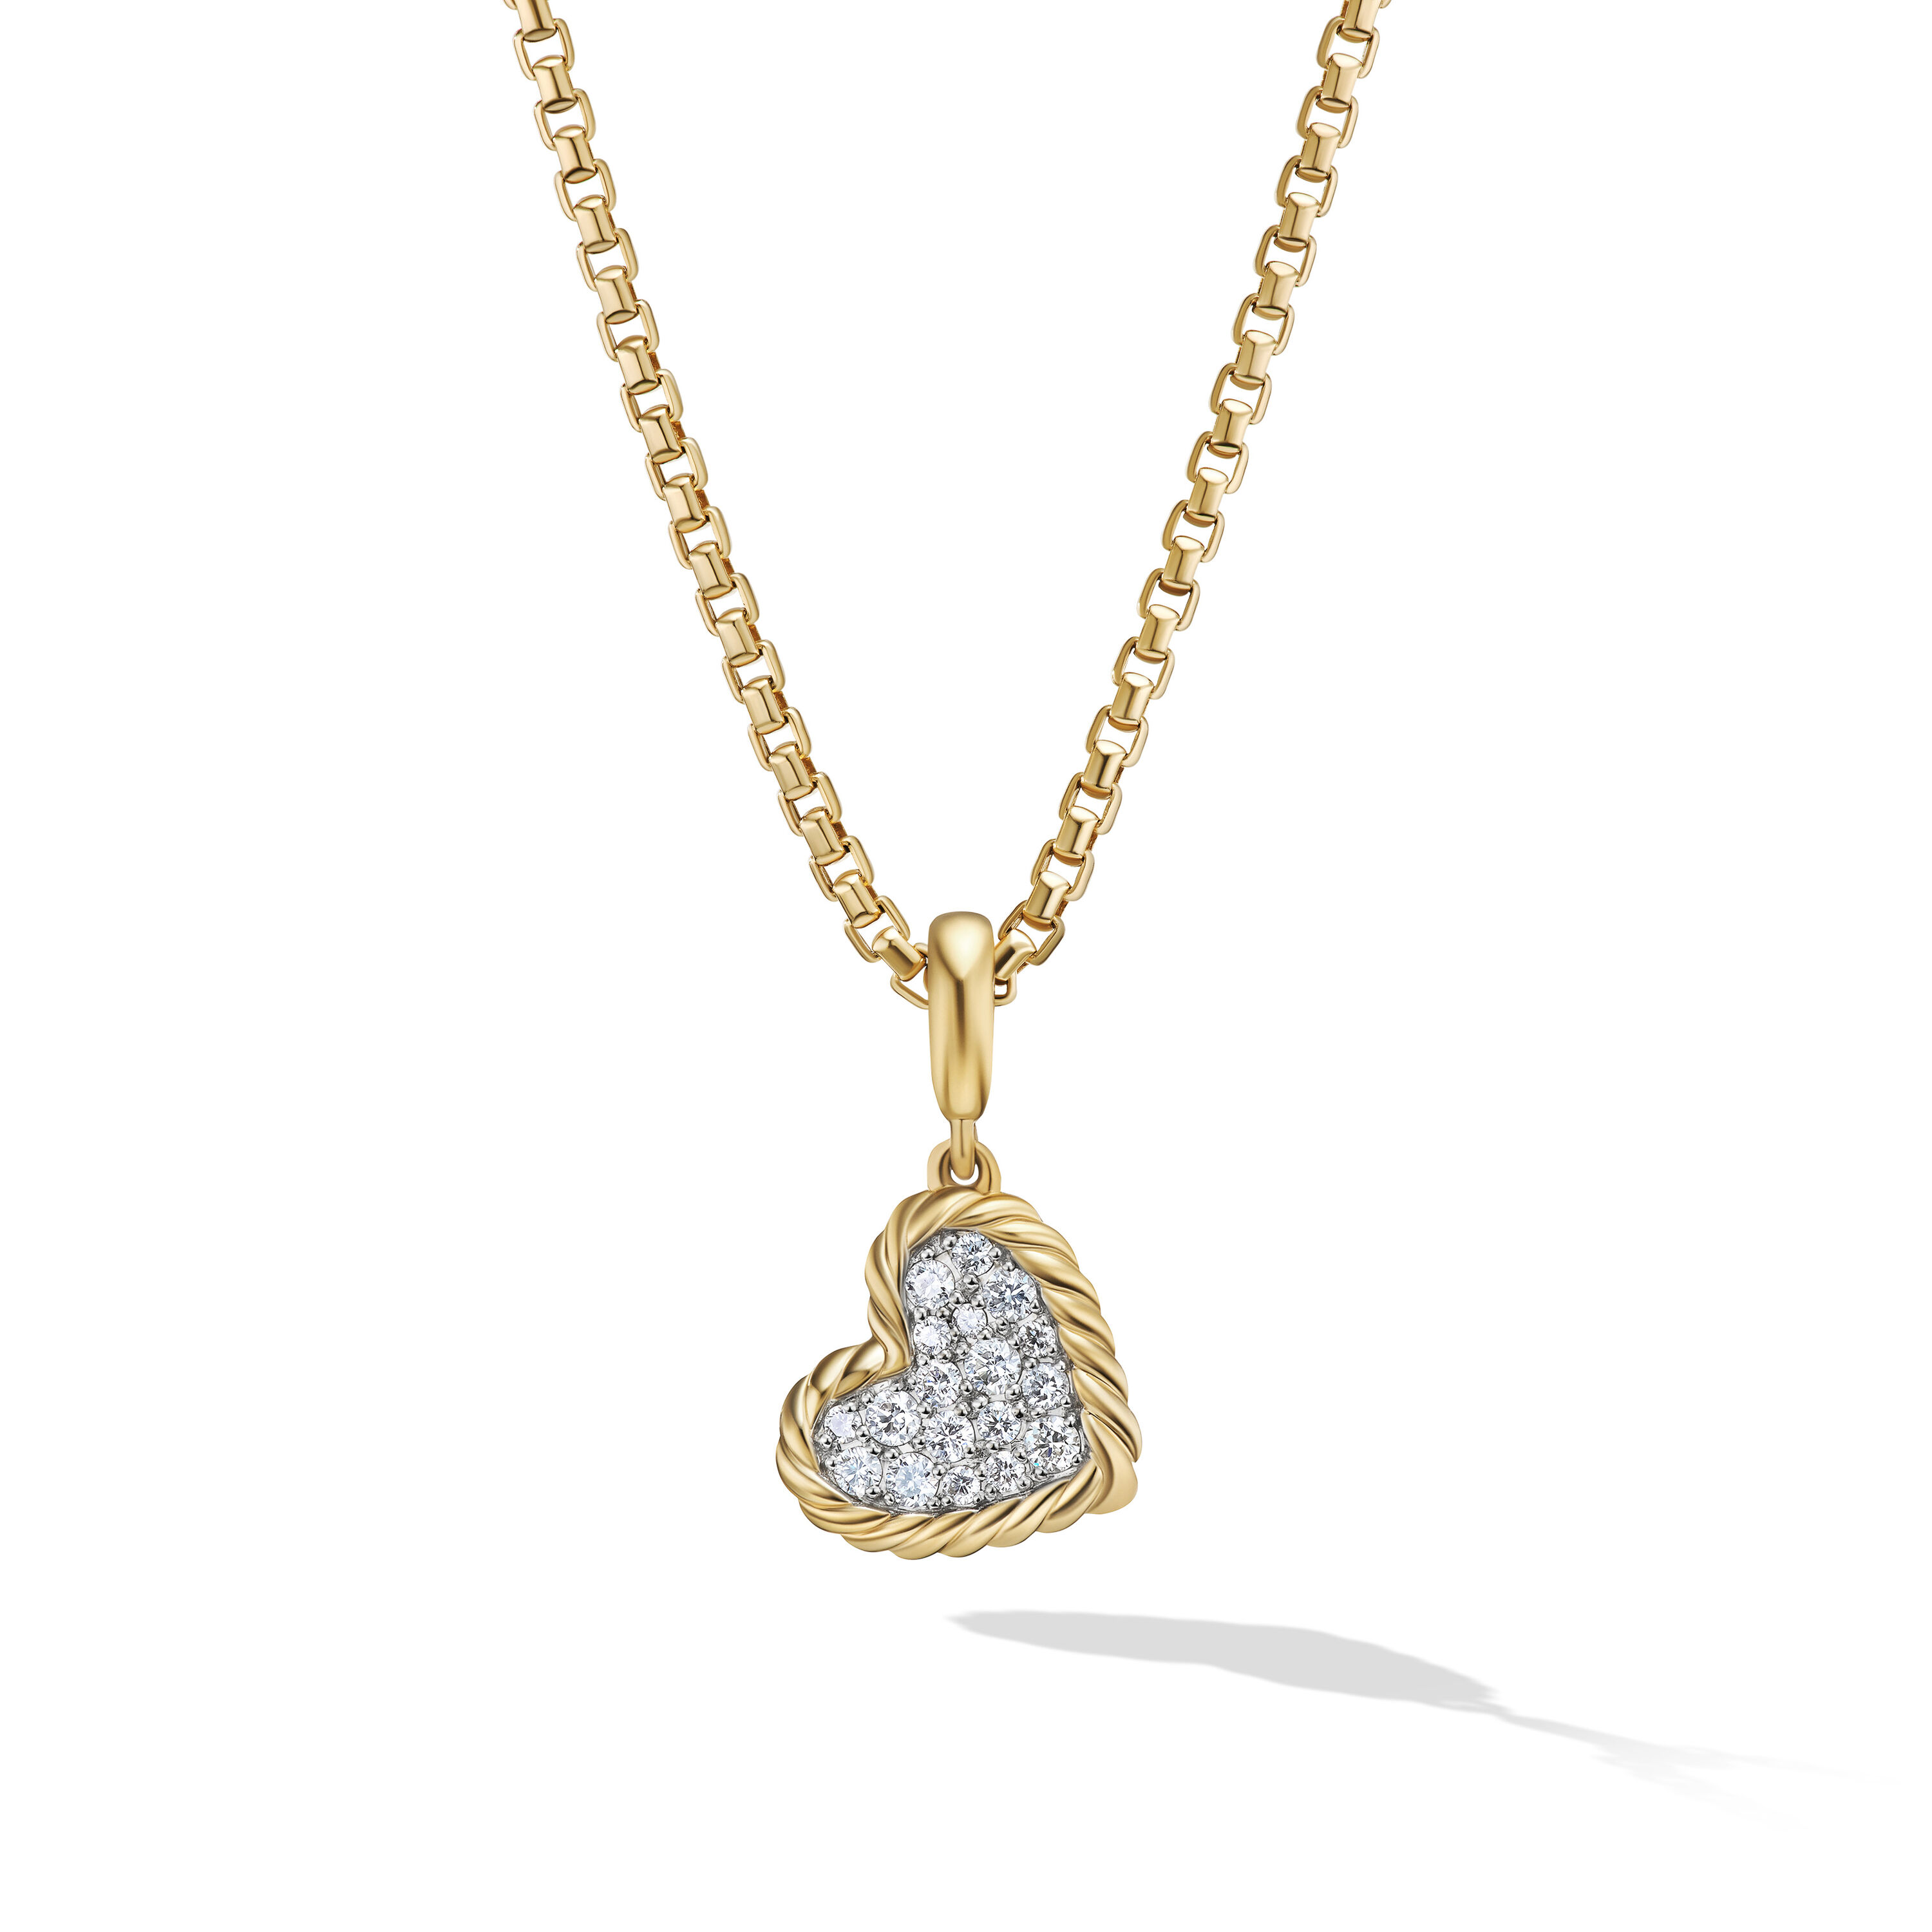 DY Elements® Heart Pendant in 18K Yellow Gold with Diamonds, 12.6mm